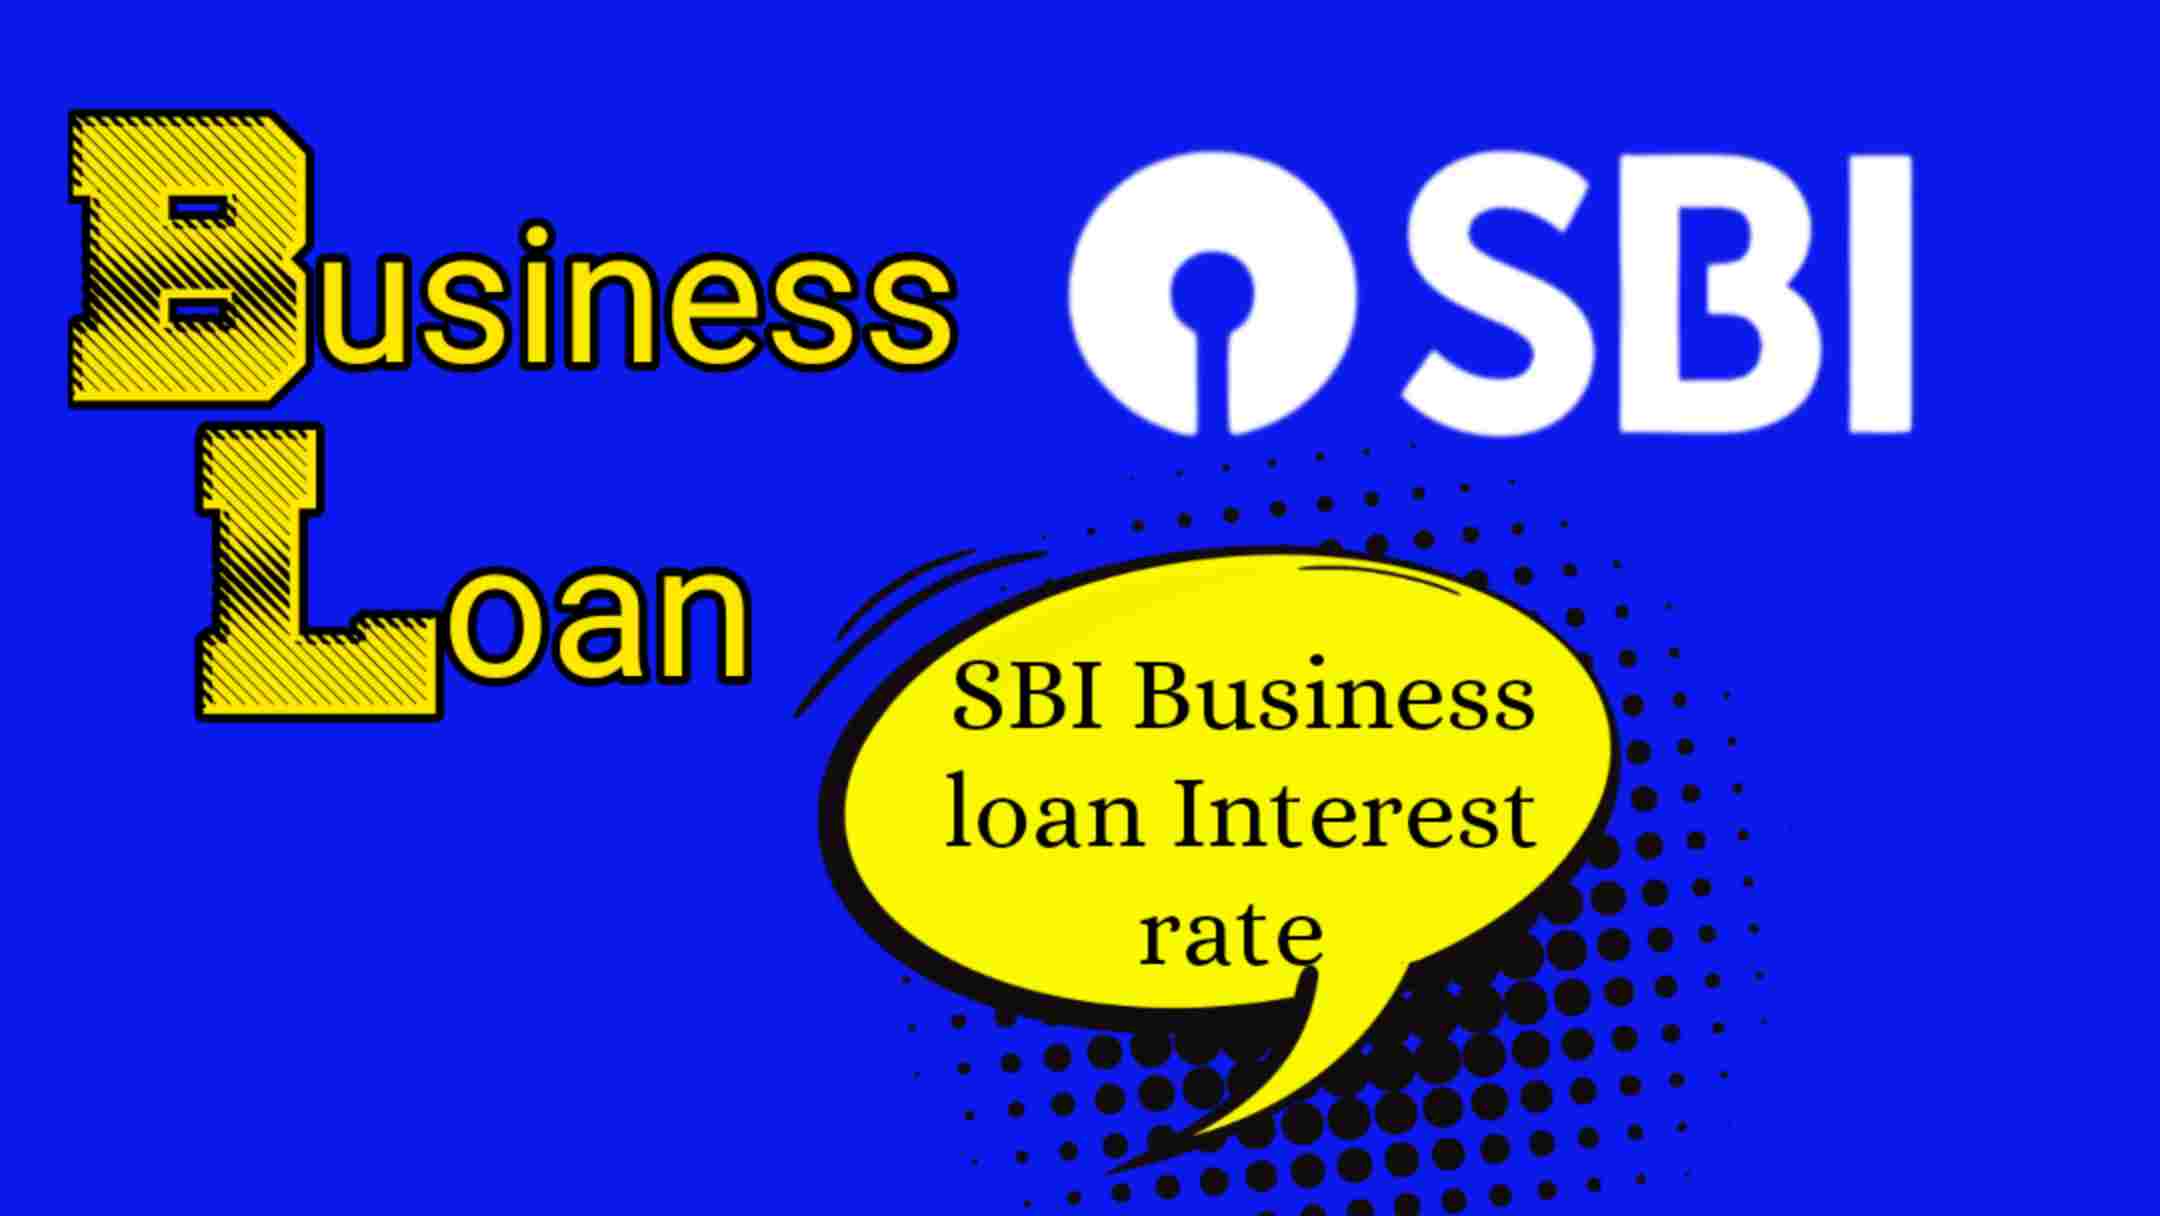 How to Apply SBI Business loan/ SBI Business Loan Interest Rate/